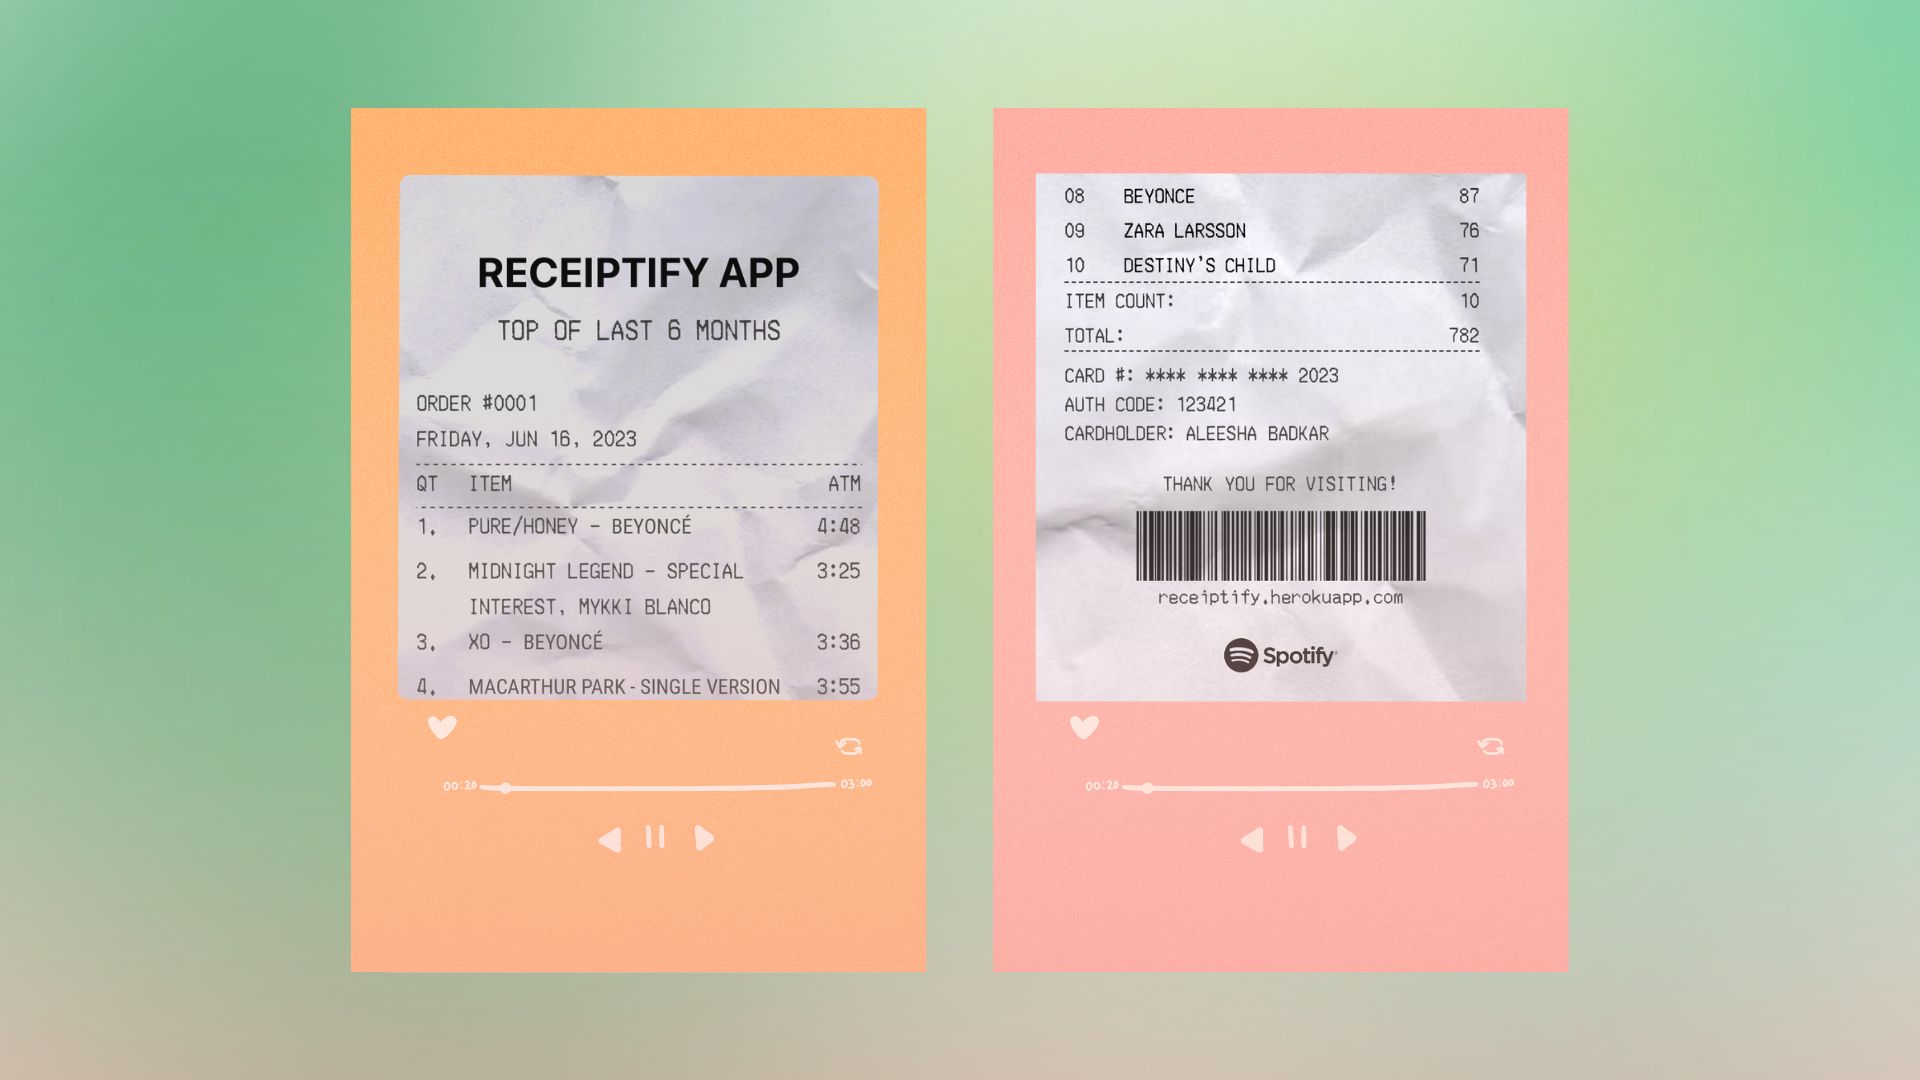 Listen to some of your favorite Spotify artists on Receiptify!